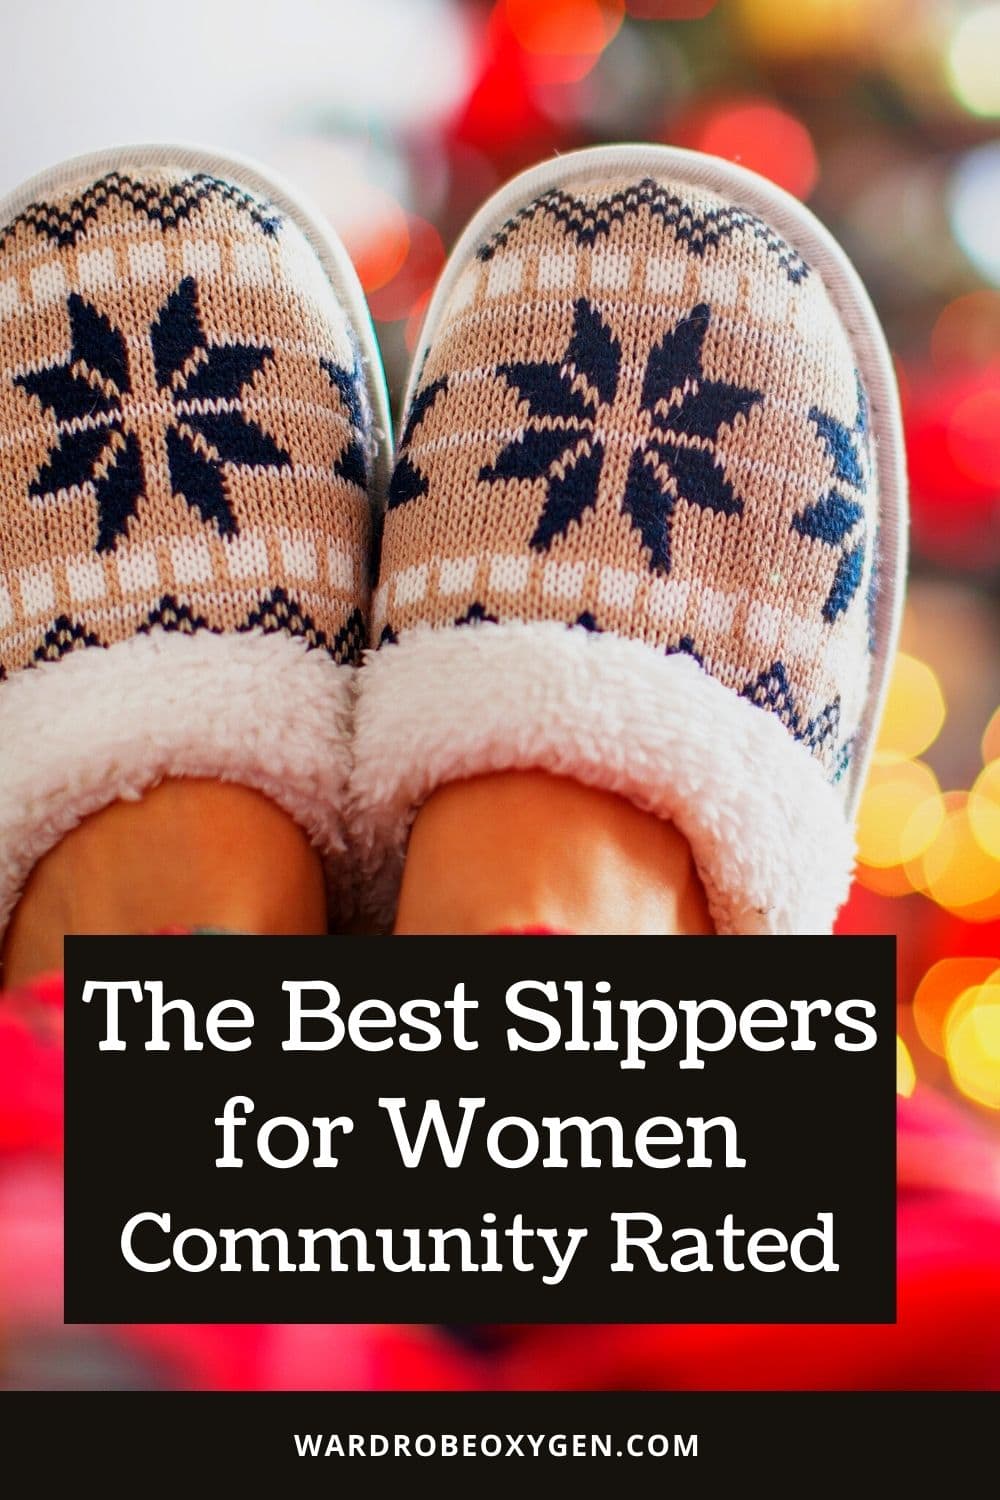 These Are the Best Women's Slippers for Cooking—and They're on Sale